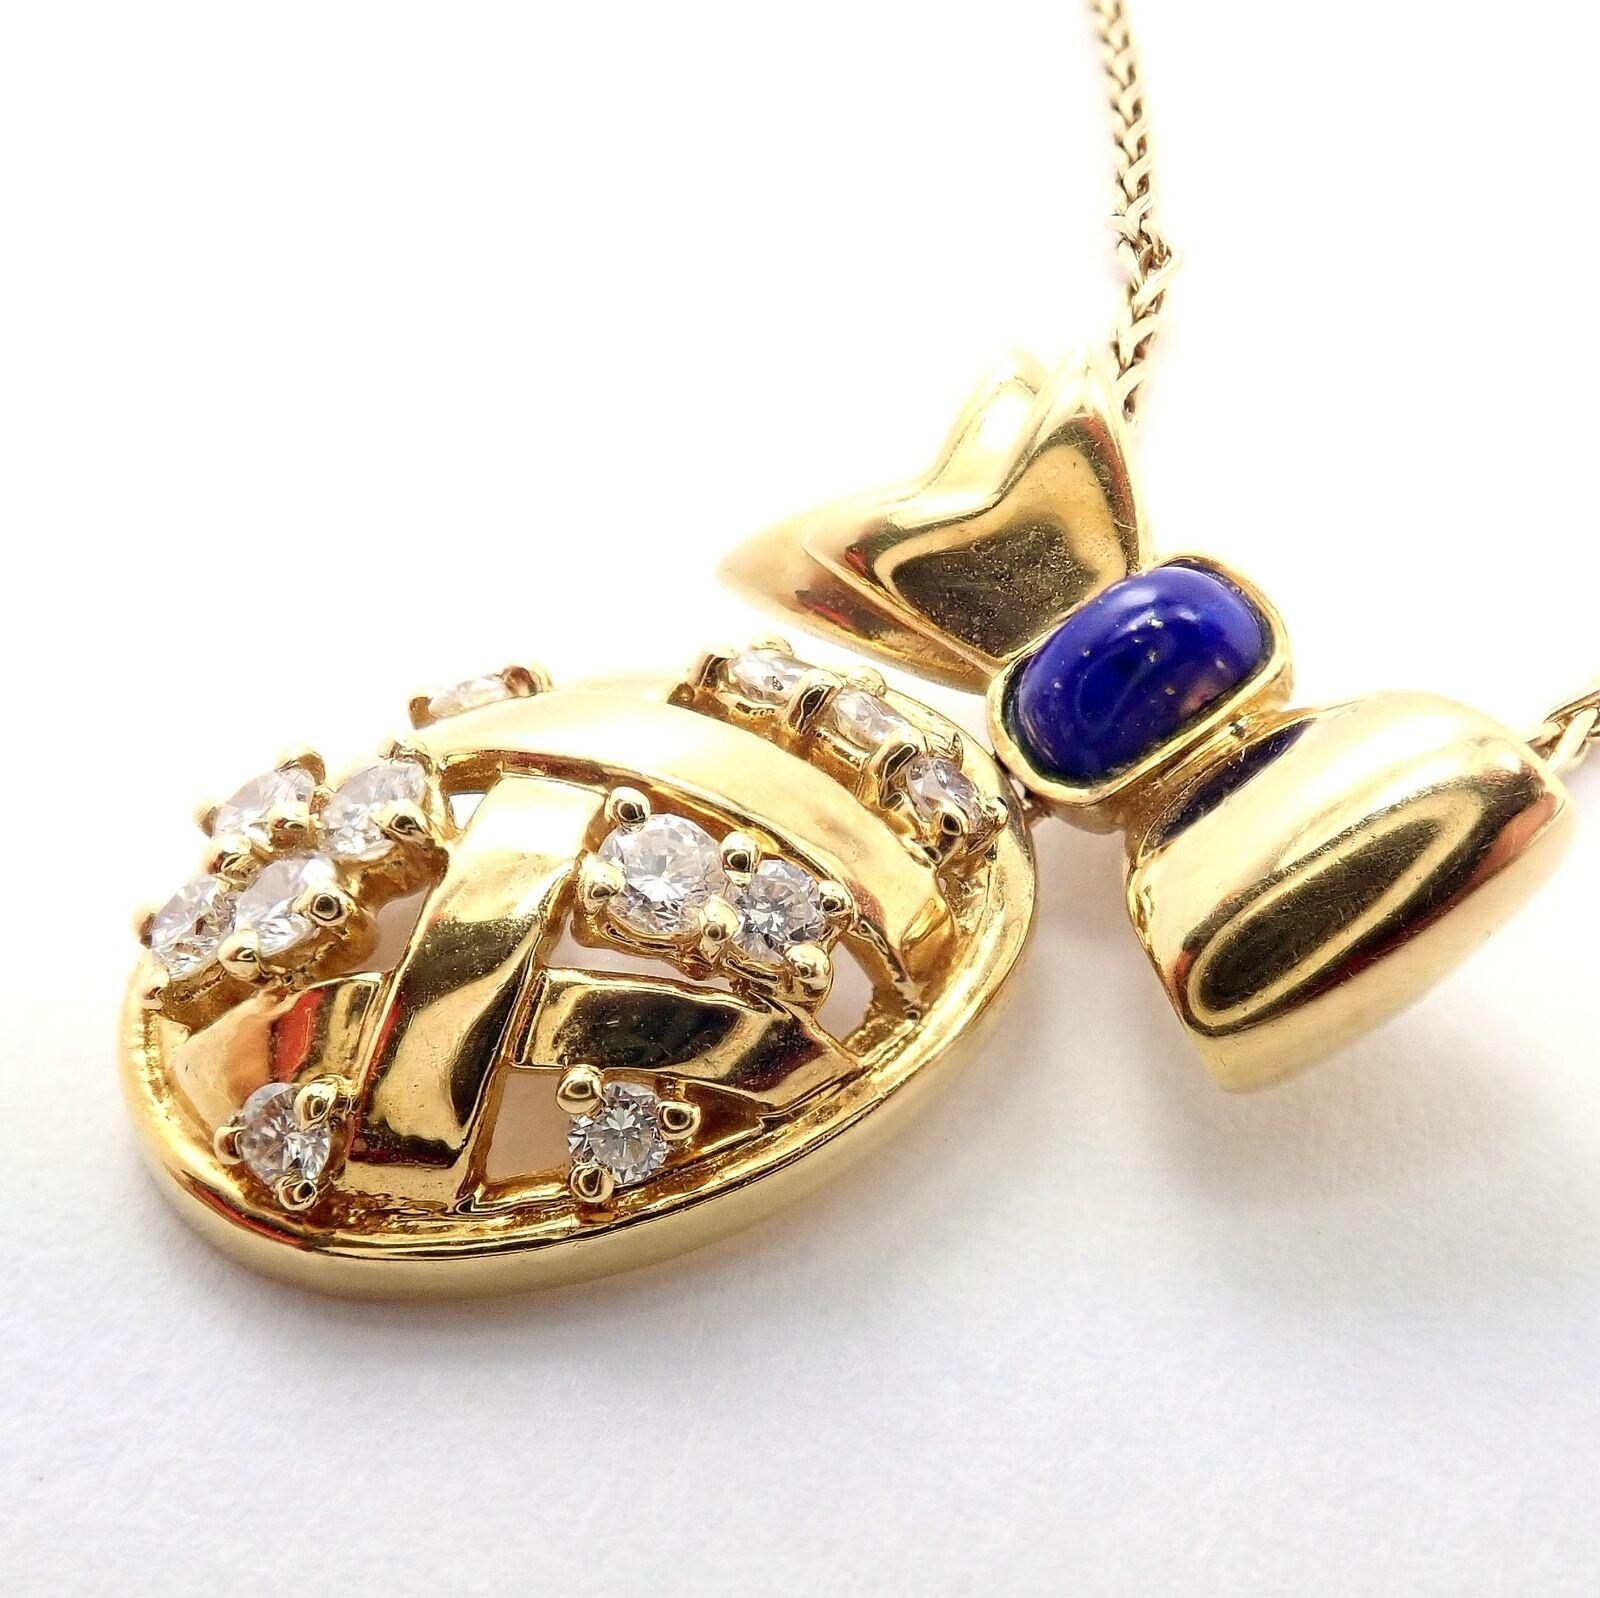 Christian Dior Lapis Diamond Bow Pendant Yellow Gold Necklace In Excellent Condition For Sale In Holland, PA